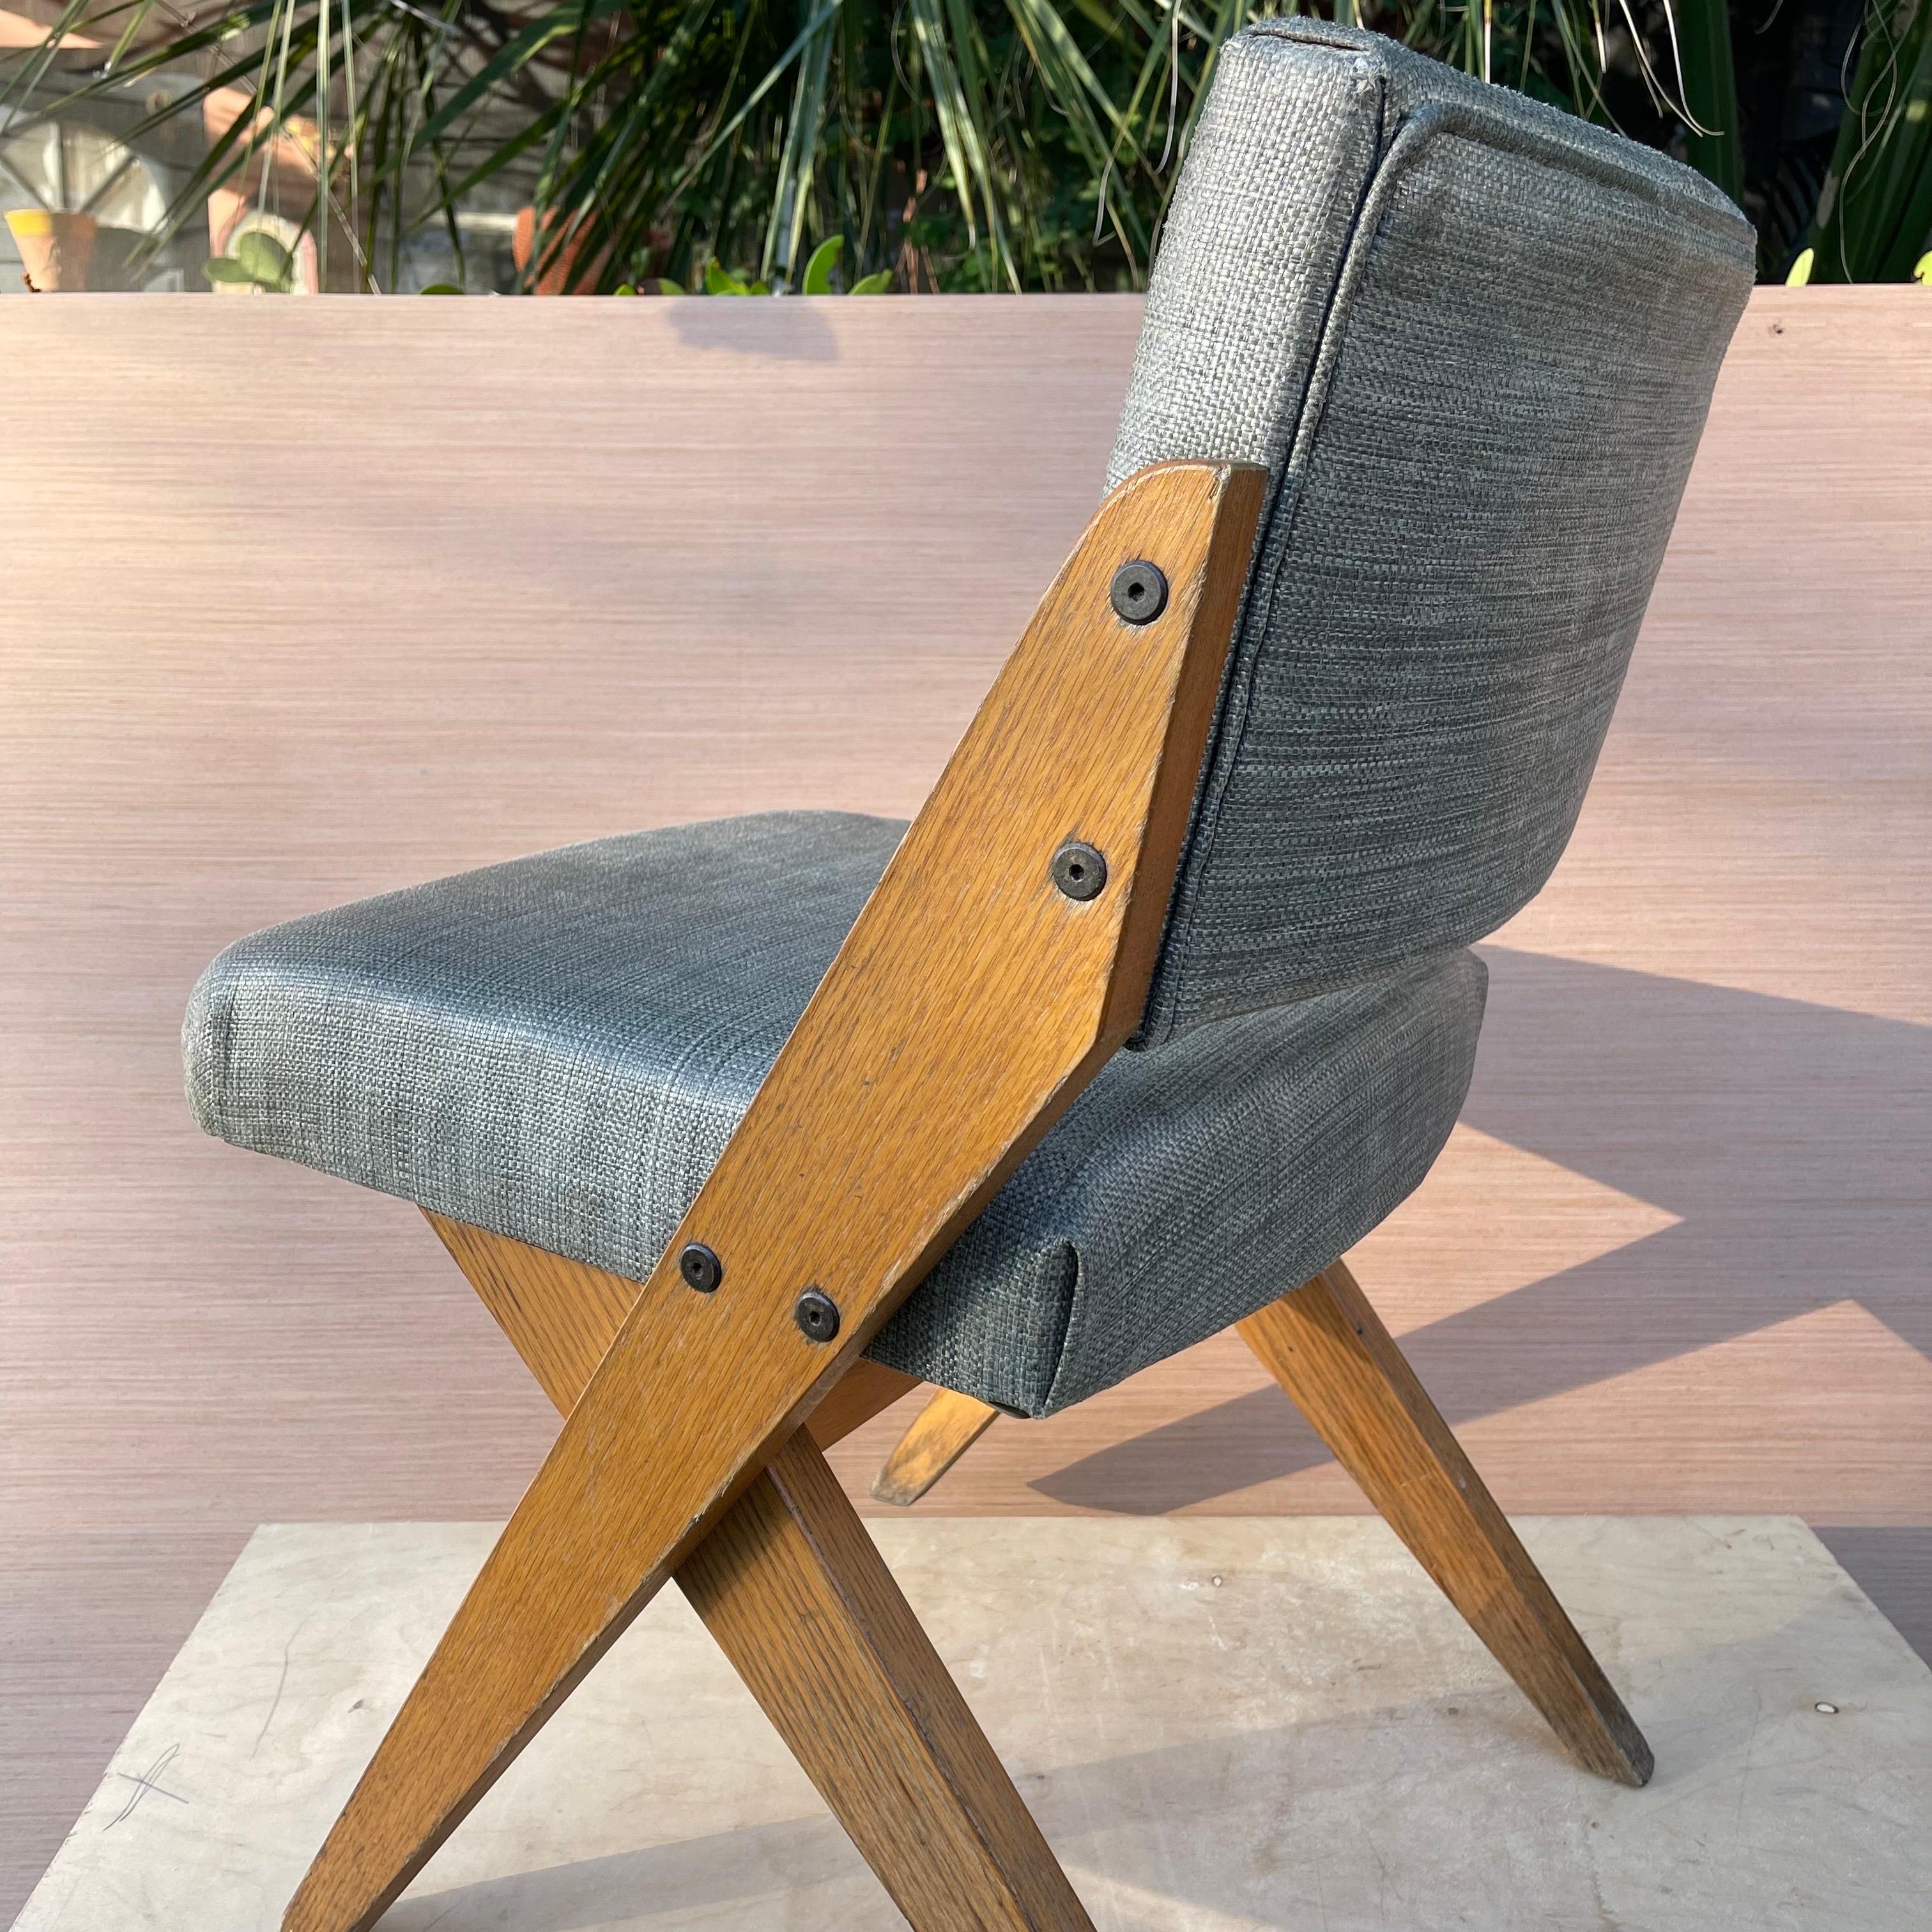 Oak frame scissor chair in the manner of Jose Zanine Caldas.

Multiple available, see photos for variation in color of upholstery. 